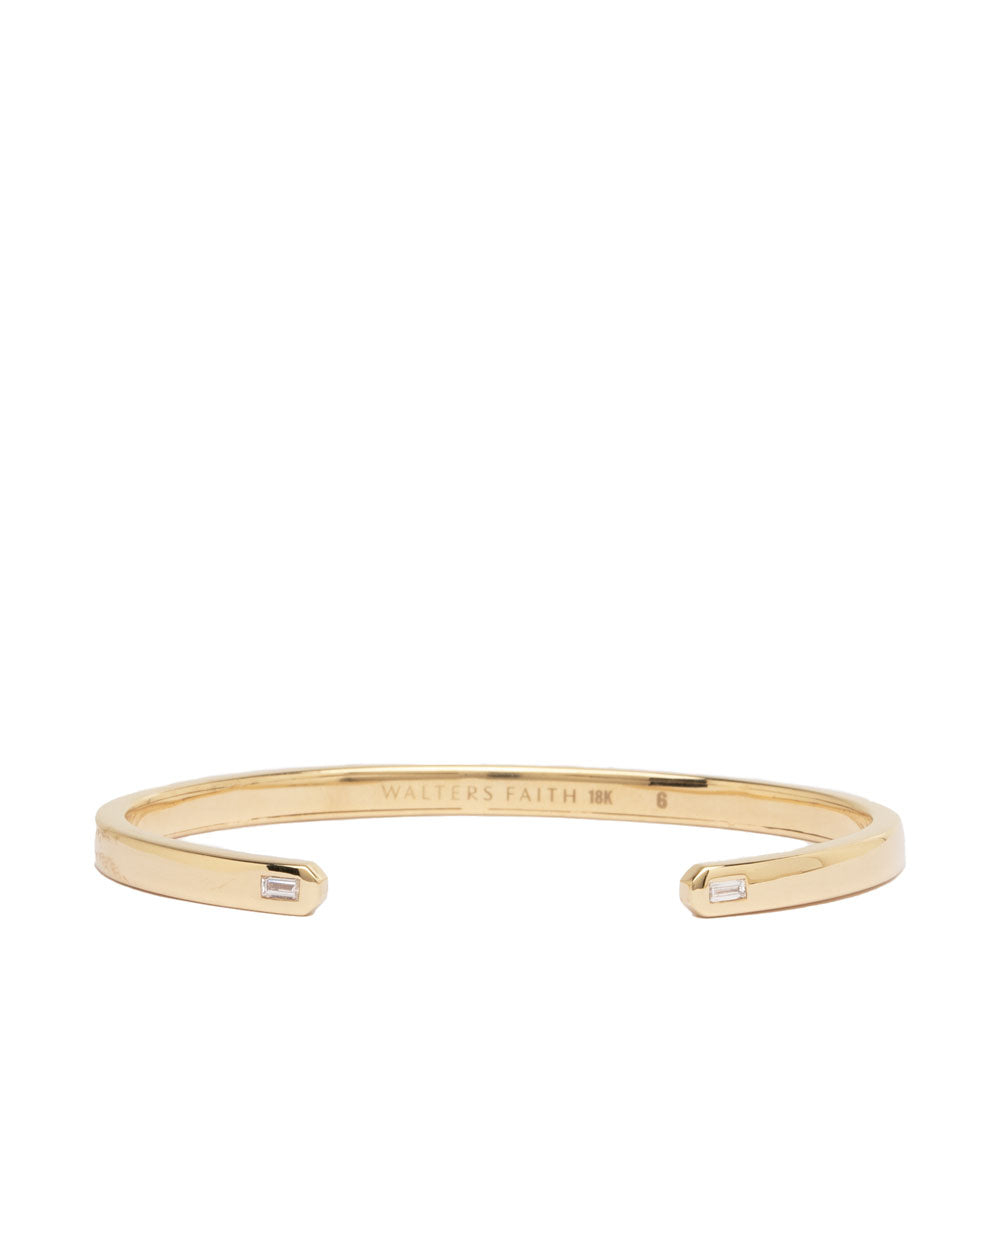 18k Yellow Gold Cuff with 2 Baguette Diamonds